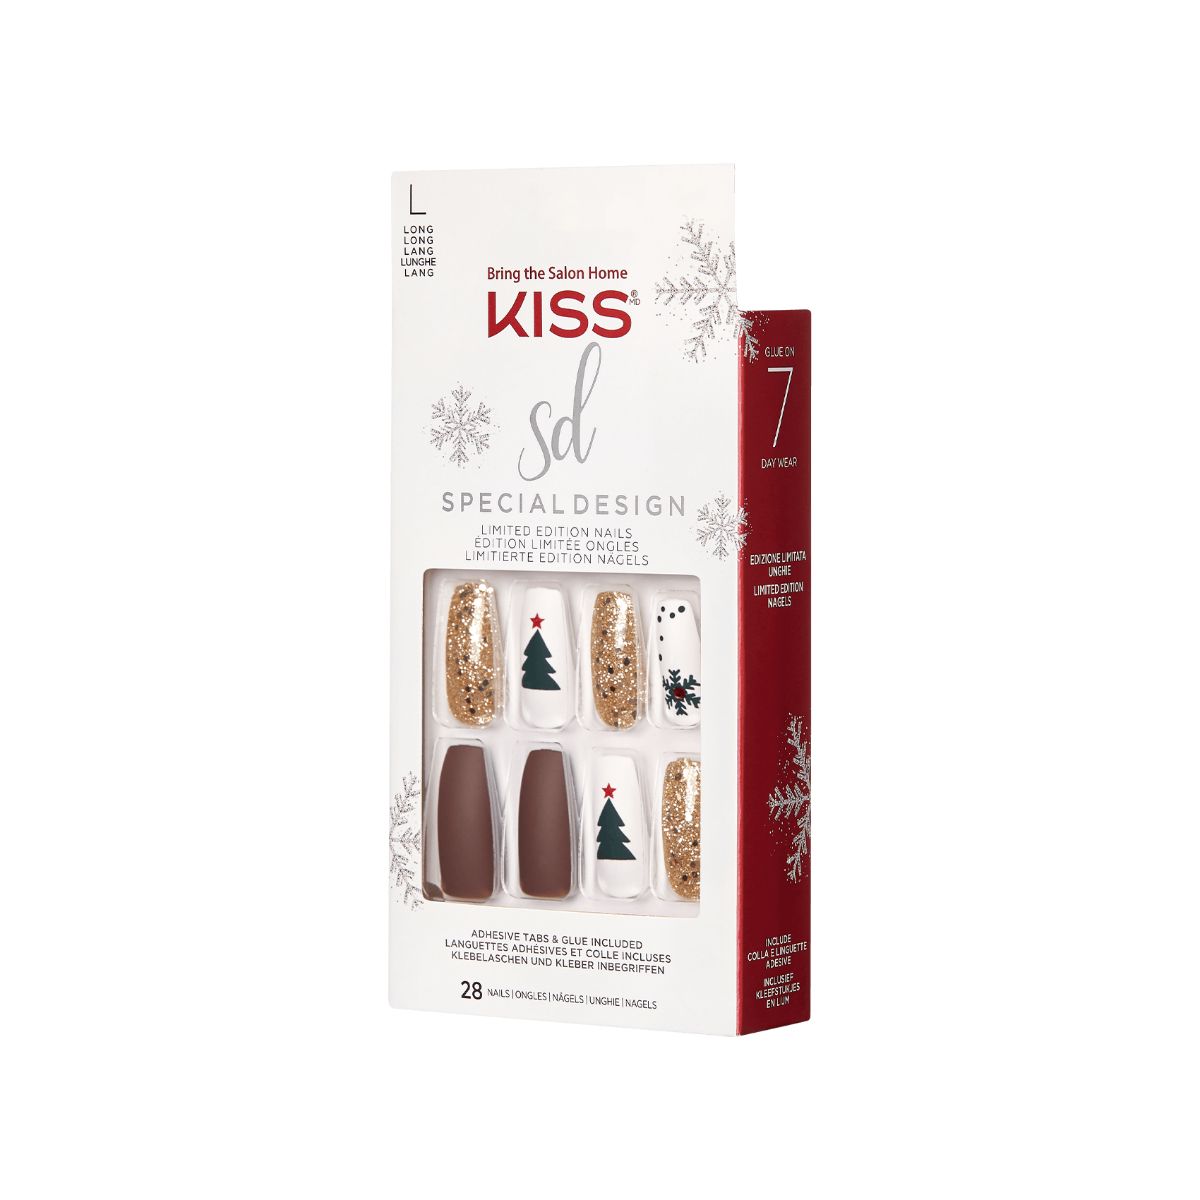 KISS Special Design Limited Edition Holiday Nails - Puffy Sweater | KISS, imPRESS, JOAH